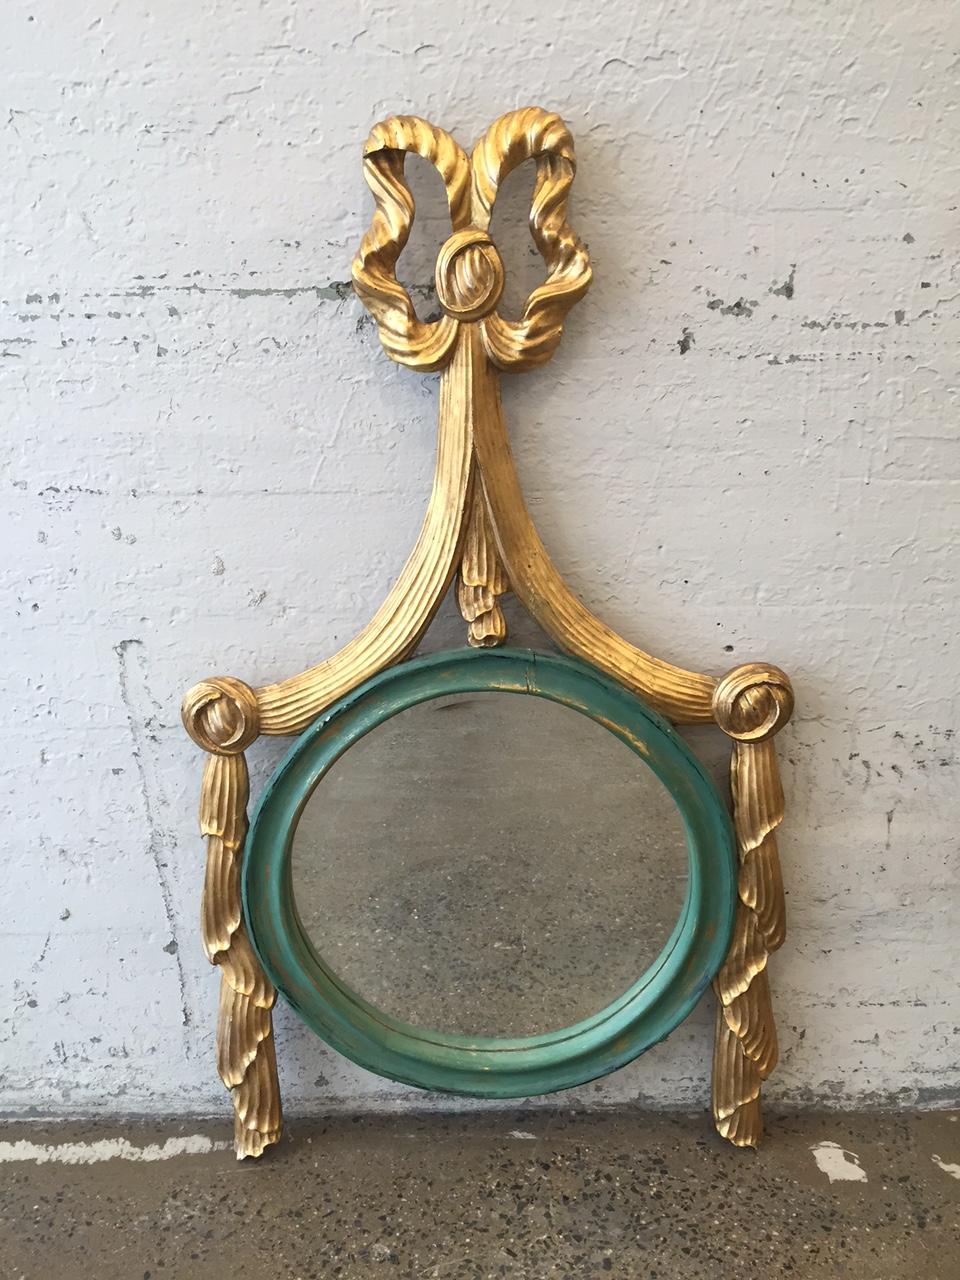 Two Italian giltwood ribbon mirrors. With green painted trim. Neoclassical style.